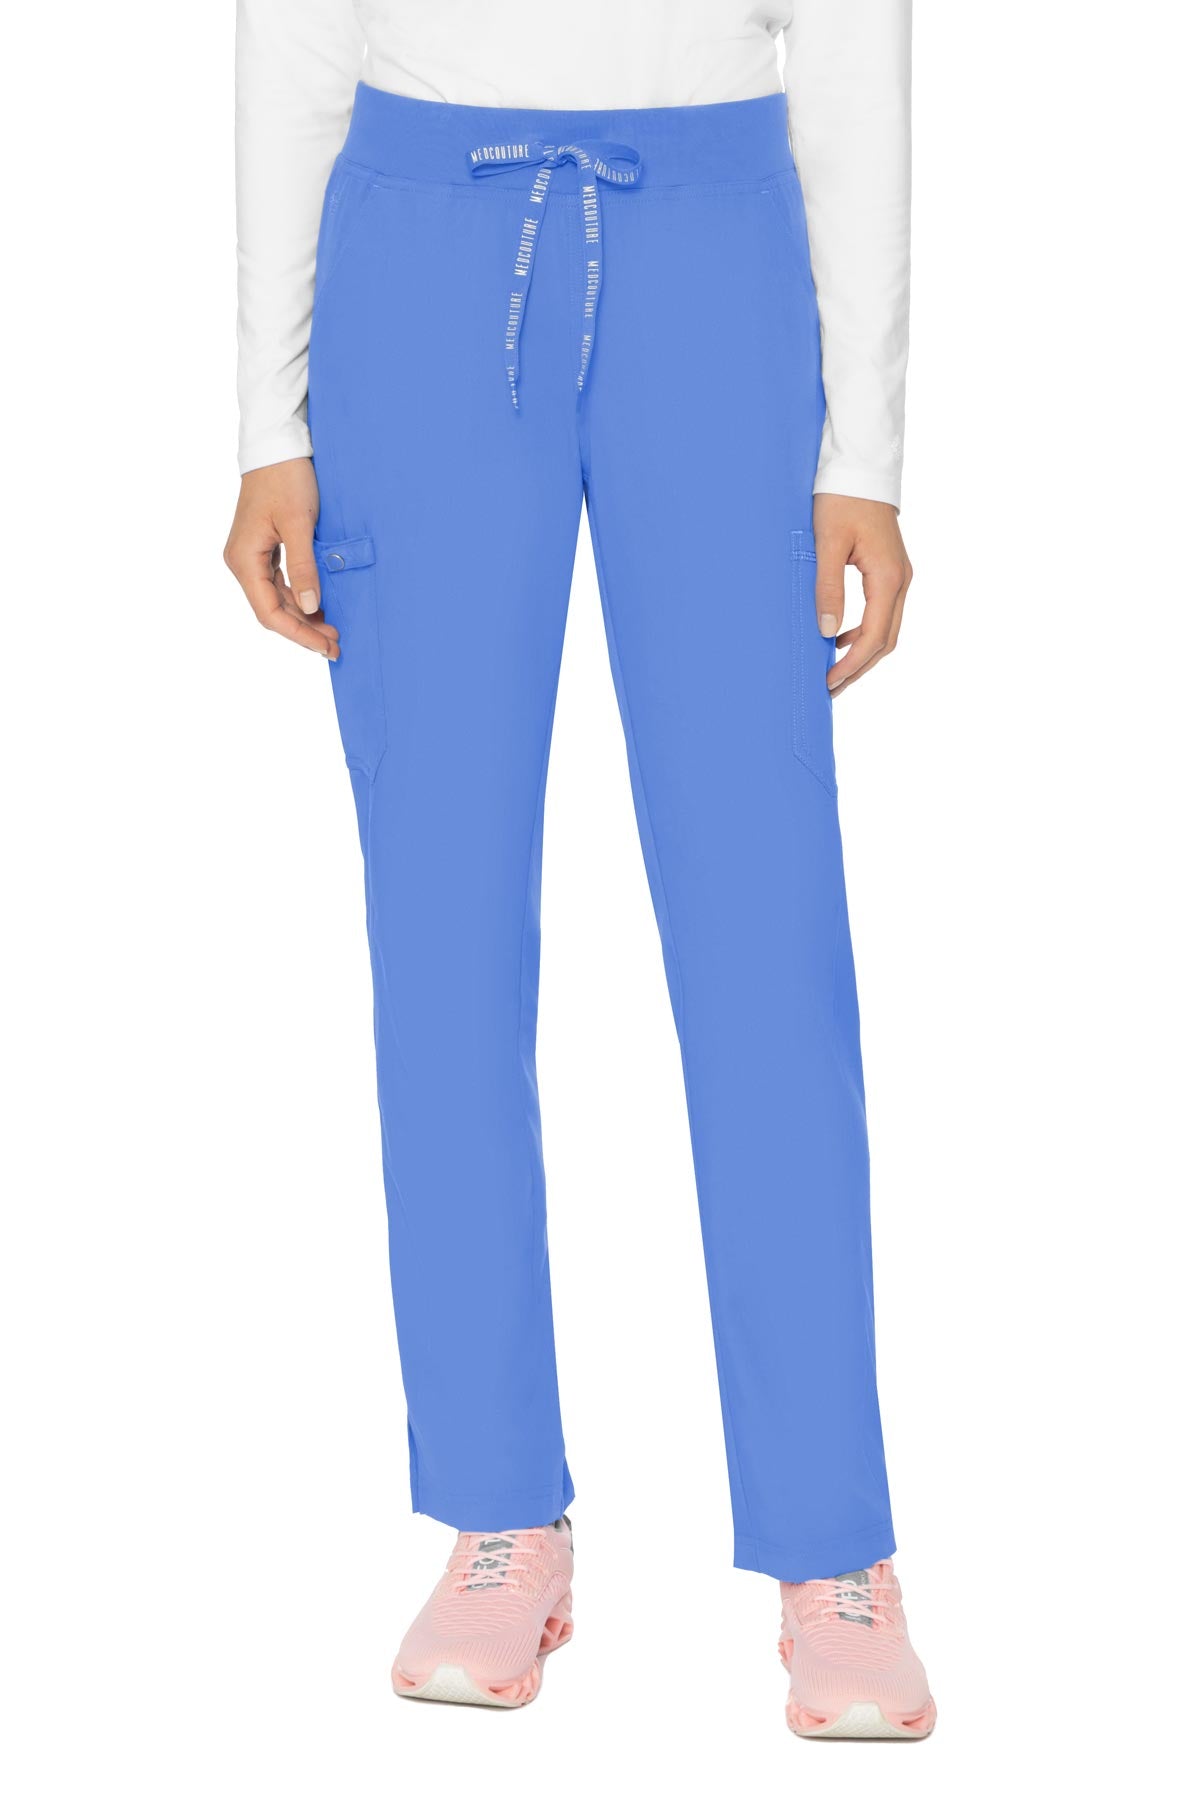 Med Couture Scrub Pants Touch Yoga in Ceil at Parker's Clothing and Shoes.